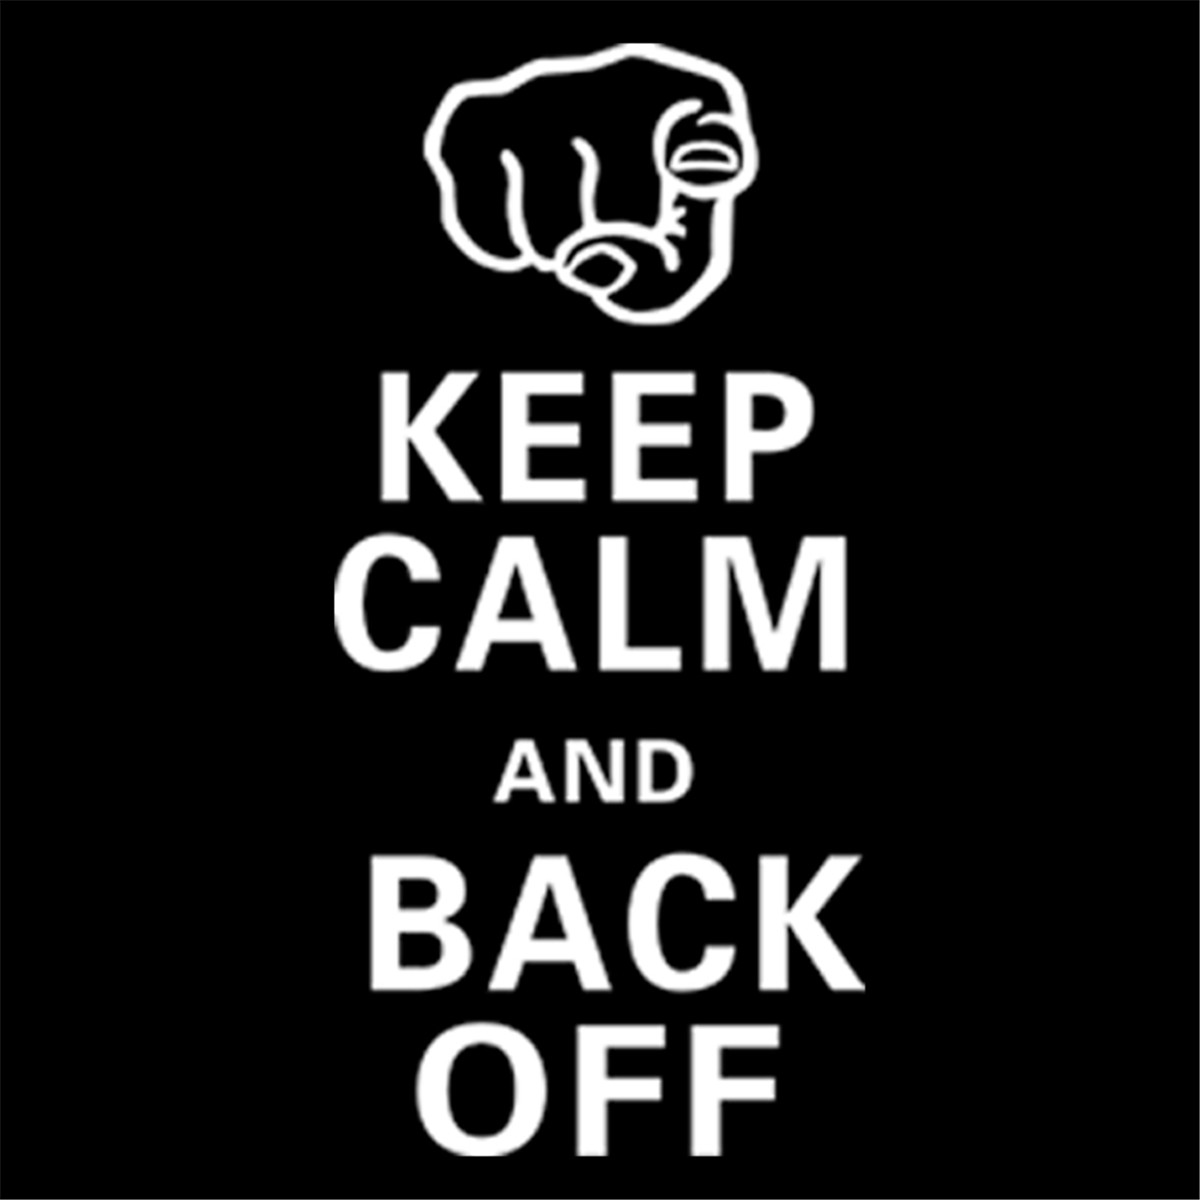 KEEP CALM AND BACK OFF Funny Sticker Car Bumper Window Door Laptop ...